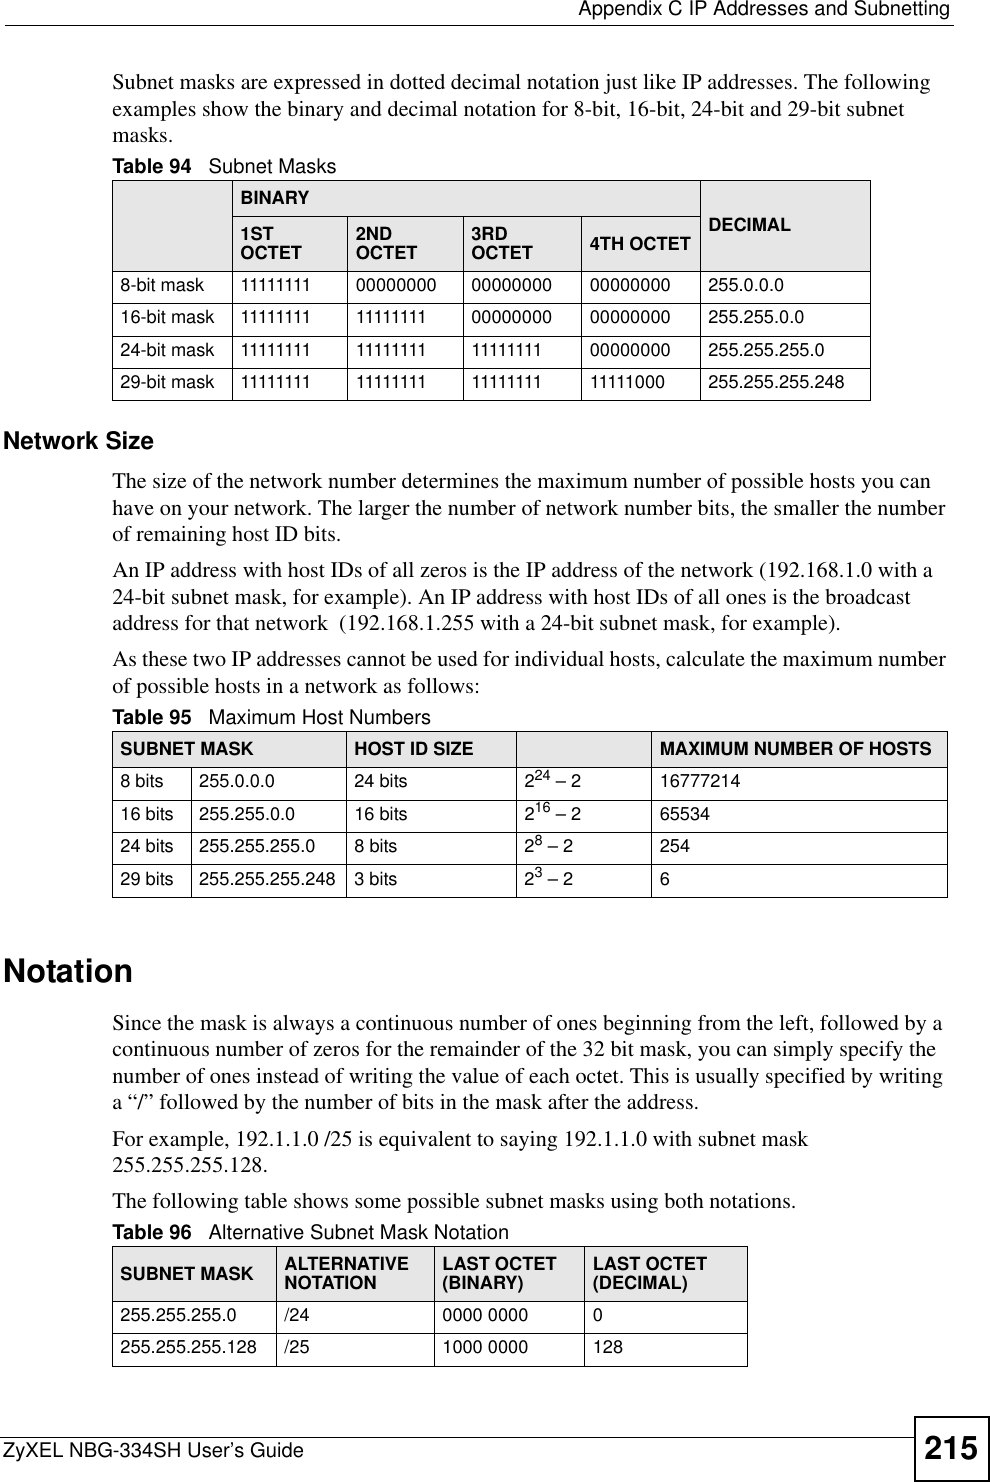  Appendix C IP Addresses and SubnettingZyXEL NBG-334SH User’s Guide 215Subnet masks are expressed in dotted decimal notation just like IP addresses. The following examples show the binary and decimal notation for 8-bit, 16-bit, 24-bit and 29-bit subnet masks. Network SizeThe size of the network number determines the maximum number of possible hosts you can have on your network. The larger the number of network number bits, the smaller the number of remaining host ID bits. An IP address with host IDs of all zeros is the IP address of the network (192.168.1.0 with a 24-bit subnet mask, for example). An IP address with host IDs of all ones is the broadcast address for that network  (192.168.1.255 with a 24-bit subnet mask, for example).As these two IP addresses cannot be used for individual hosts, calculate the maximum number of possible hosts in a network as follows:NotationSince the mask is always a continuous number of ones beginning from the left, followed by a continuous number of zeros for the remainder of the 32 bit mask, you can simply specify the number of ones instead of writing the value of each octet. This is usually specified by writing a “/” followed by the number of bits in the mask after the address. For example, 192.1.1.0 /25 is equivalent to saying 192.1.1.0 with subnet mask 255.255.255.128. The following table shows some possible subnet masks using both notations. Table 94   Subnet MasksBINARYDECIMAL1ST OCTET 2ND OCTET 3RD OCTET 4TH OCTET8-bit mask 11111111 00000000 00000000 00000000 255.0.0.016-bit mask 11111111 11111111 00000000 00000000 255.255.0.024-bit mask 11111111 11111111 11111111 00000000 255.255.255.029-bit mask 11111111 11111111 11111111 11111000 255.255.255.248Table 95   Maximum Host NumbersSUBNET MASK HOST ID SIZE MAXIMUM NUMBER OF HOSTS8 bits 255.0.0.0 24 bits 224 – 2 1677721416 bits 255.255.0.0 16 bits 216 – 2 6553424 bits 255.255.255.0 8 bits 28 – 2 25429 bits 255.255.255.248 3 bits 23 – 2 6Table 96   Alternative Subnet Mask NotationSUBNET MASK ALTERNATIVE NOTATION LAST OCTET (BINARY) LAST OCTET (DECIMAL)255.255.255.0 /24 0000 0000 0255.255.255.128 /25 1000 0000 128